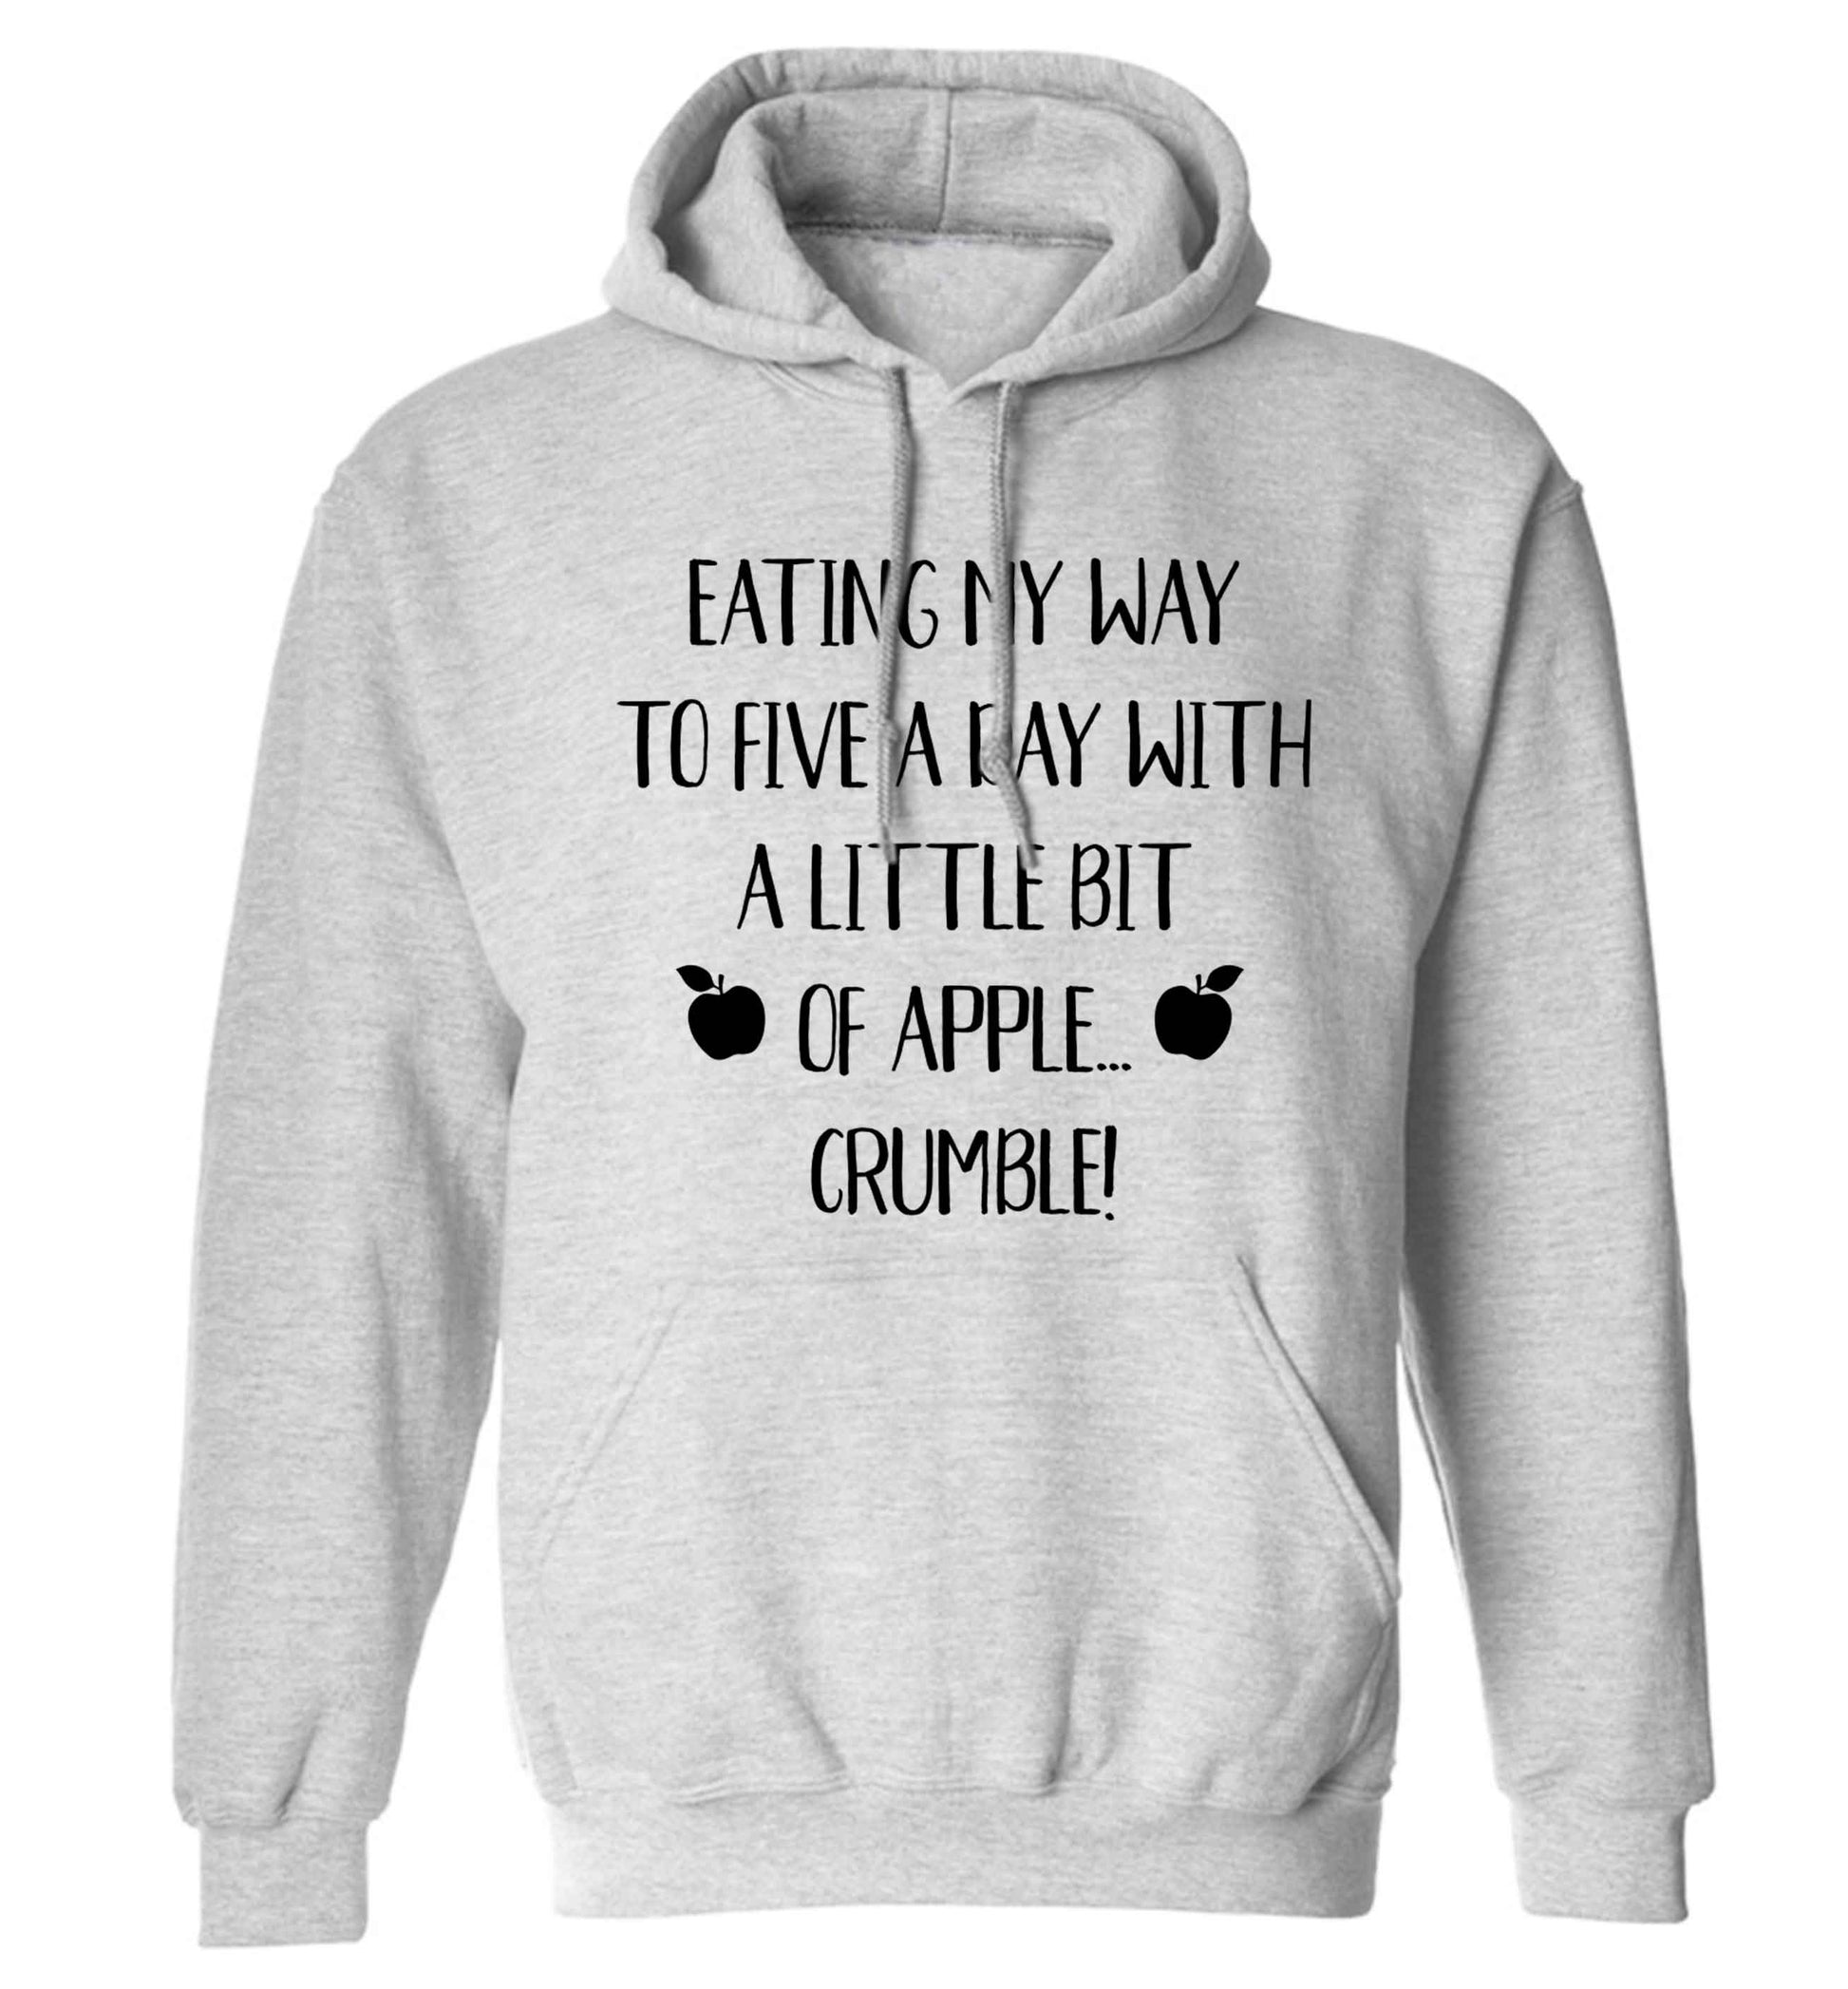 Eating my way to five a day with a little bit of apple crumble adults unisex grey hoodie 2XL